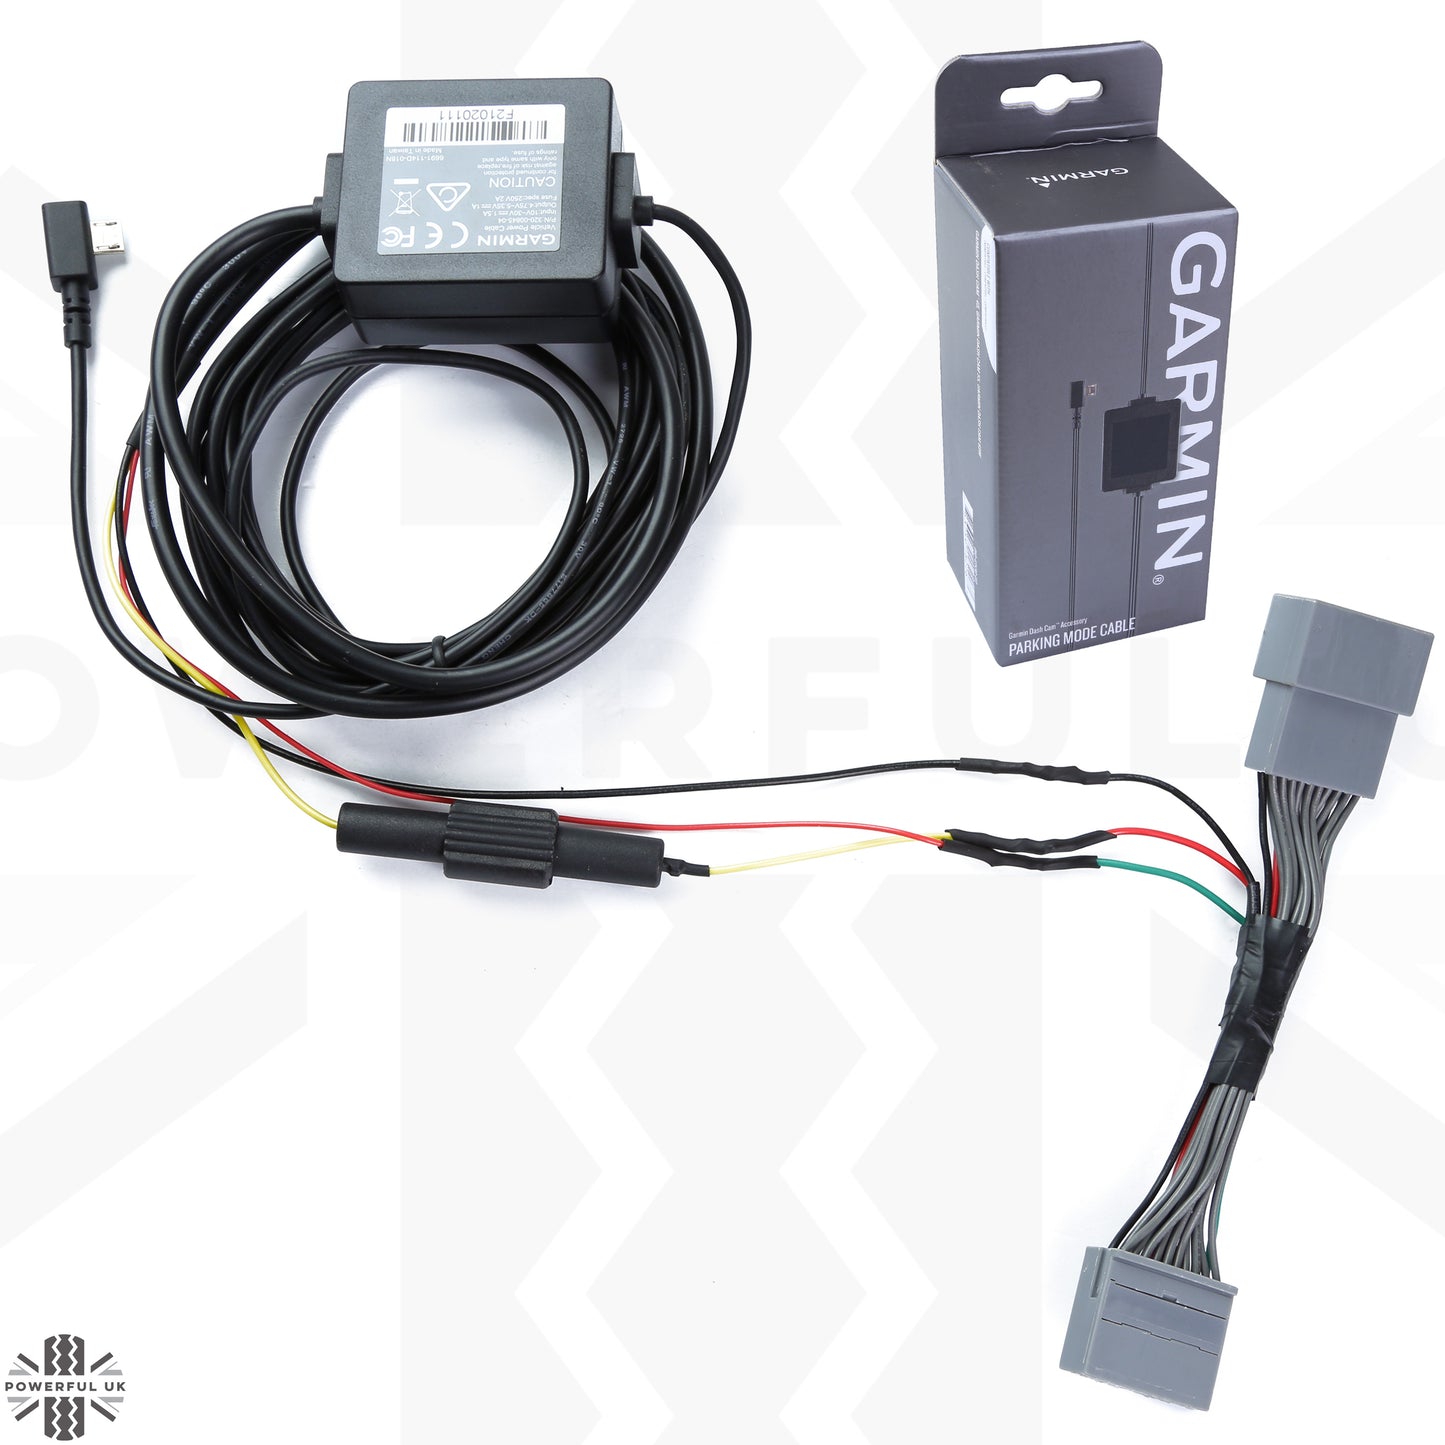 Dash Cam Wiring Kit - Garmin Hardwire Kit for Range Rover Evoque with LATE overhead console (2014+)